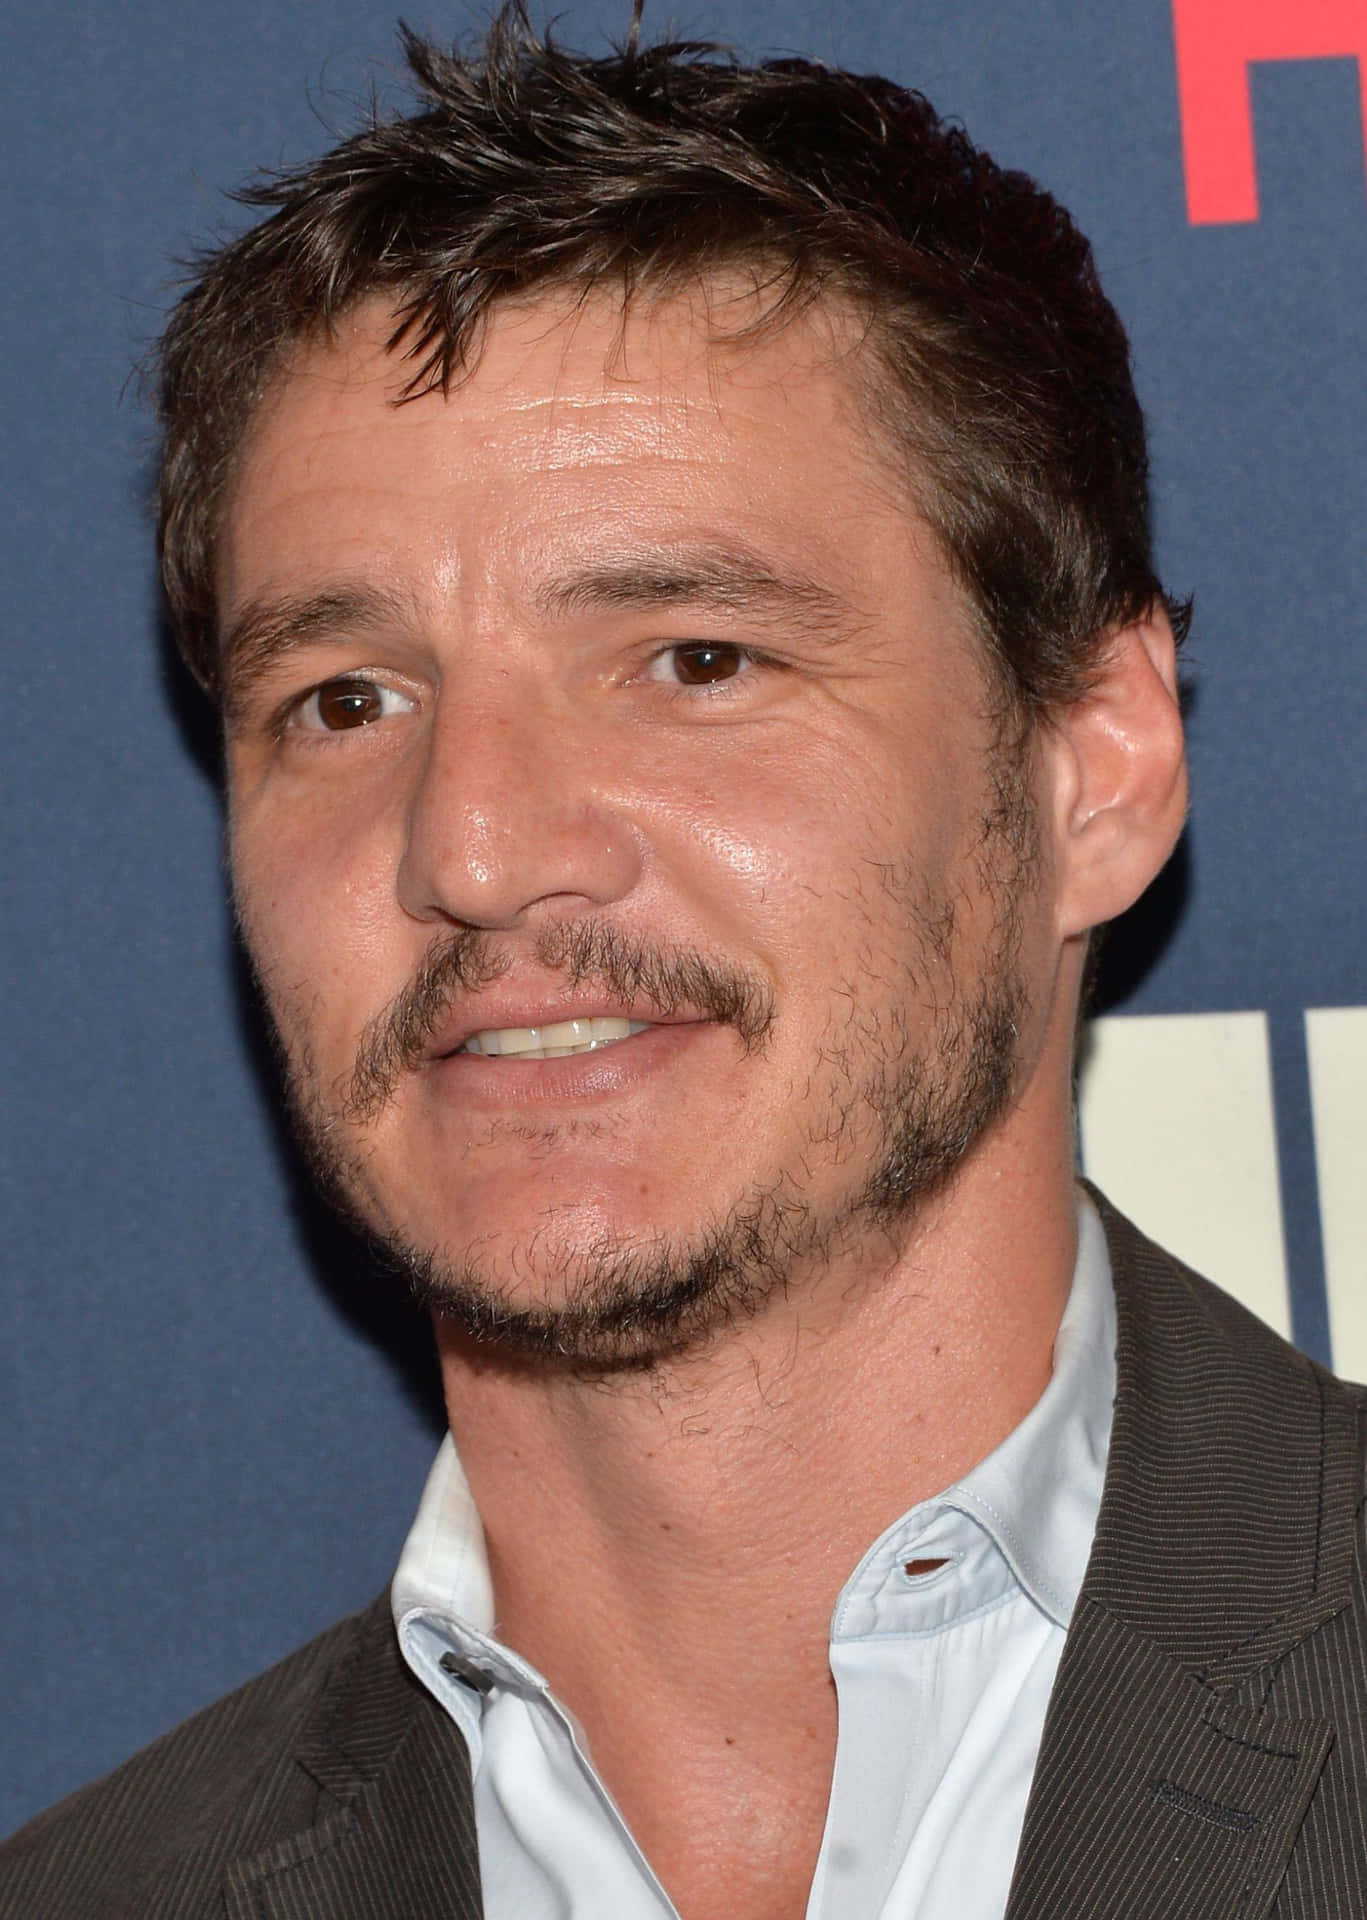 Pedro Pascal Event Appearance Background